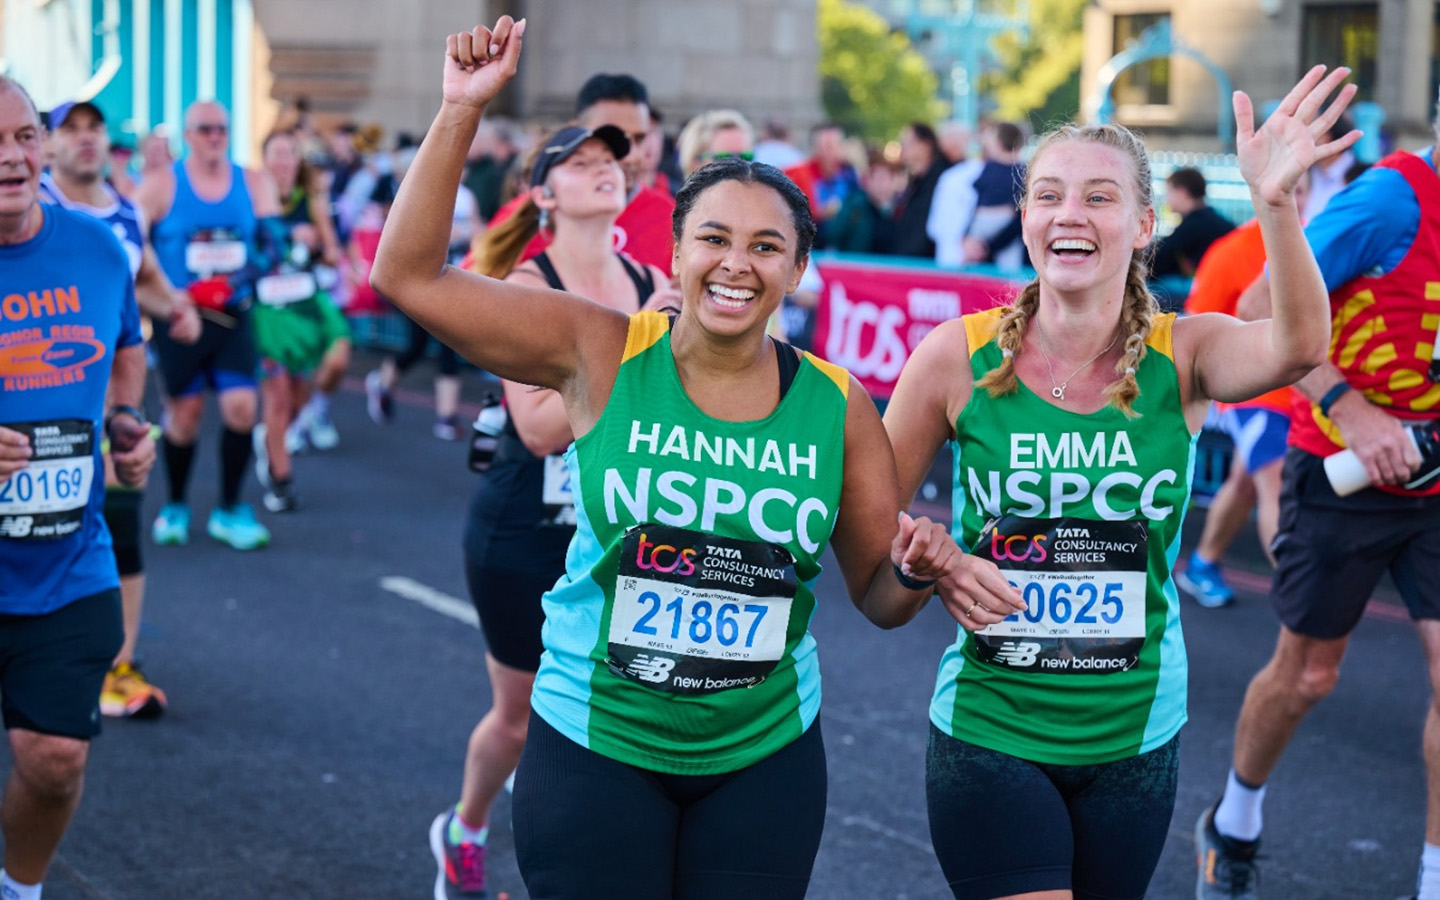 Two women in green NSPCC running vests running and smiling.